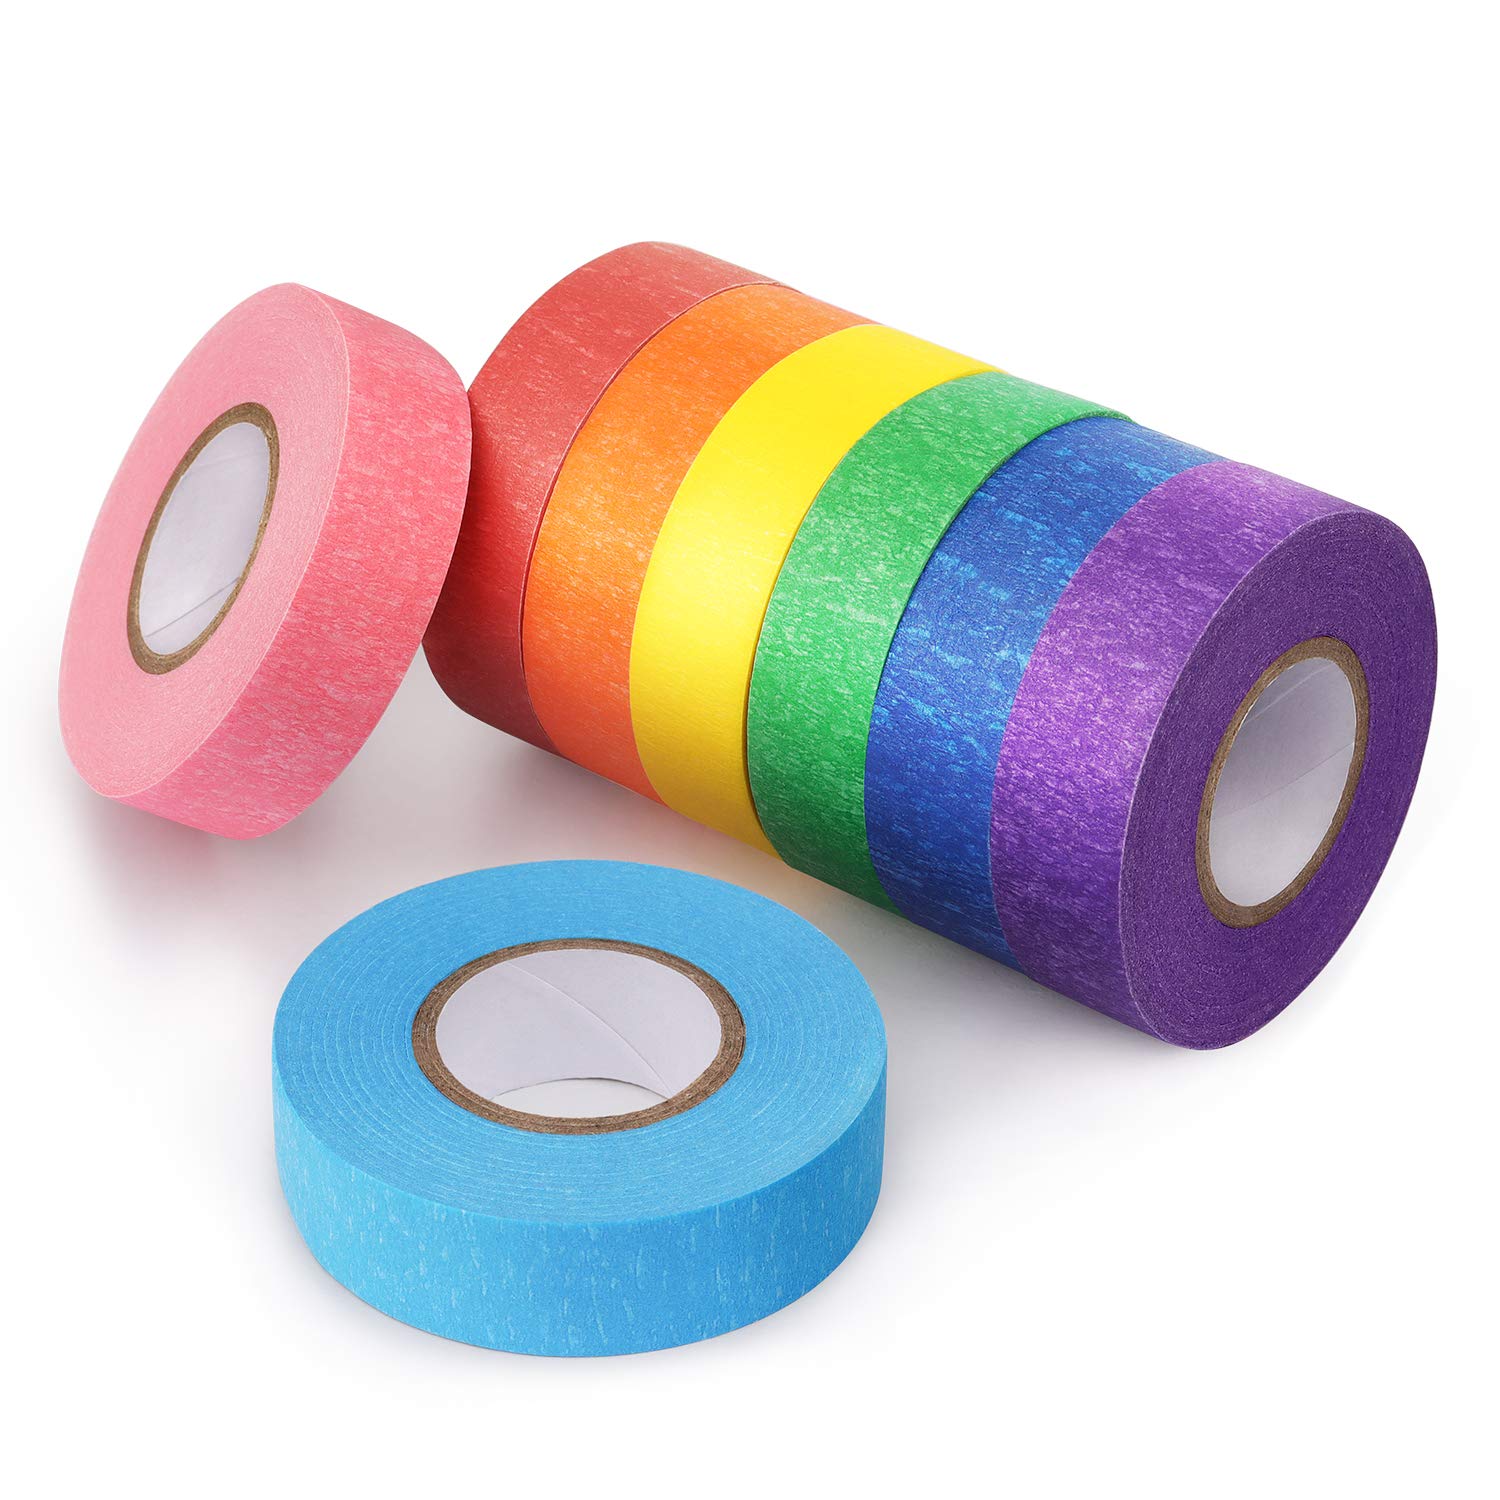 Rolls Colored Masking Tape Rainbow Colors Painters Tape Colorful Craft  Art Paper Tape for Arts Crafts DIY Decorative Colors